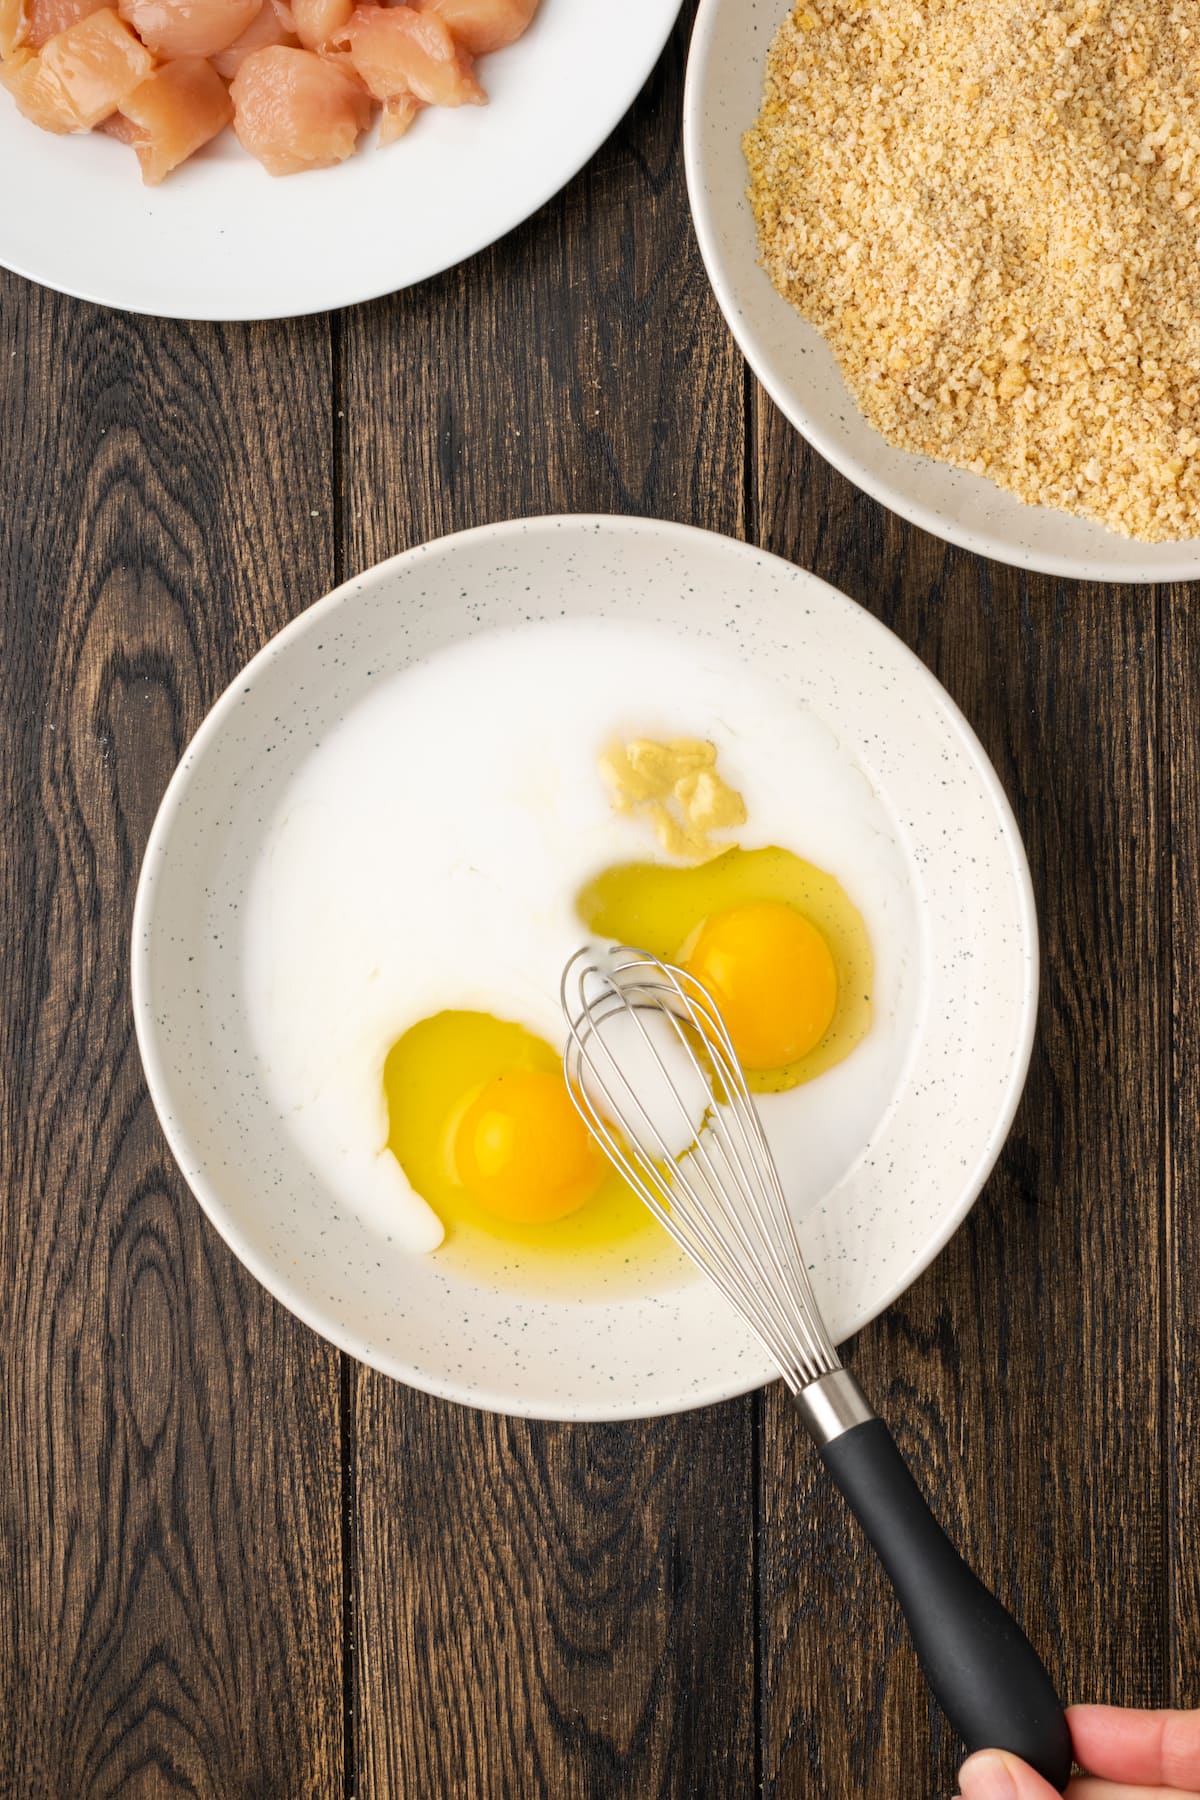 Eggs and milk are whisked together in a white bowl for an egg wash.